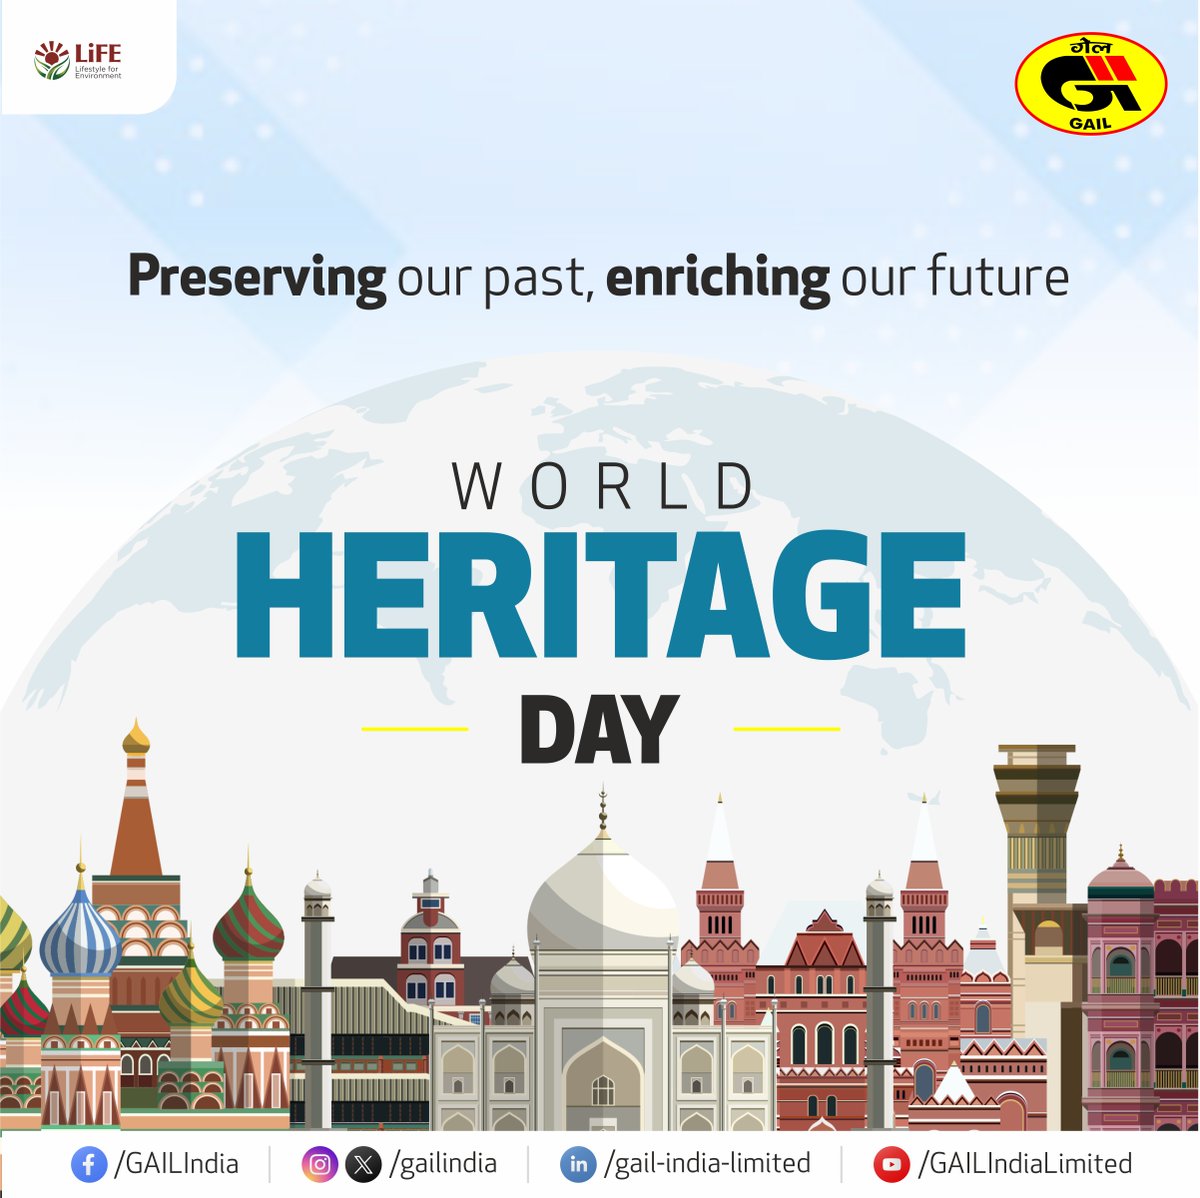 On World Heritage Day, let us all pledge to cherish and preserve our heritage, ensuring its timeless beauty enriches the future generations to come. . . #GAIL #GAILIndia #EnergizingPossibilities #worldheritage #beauty #generations #heritage